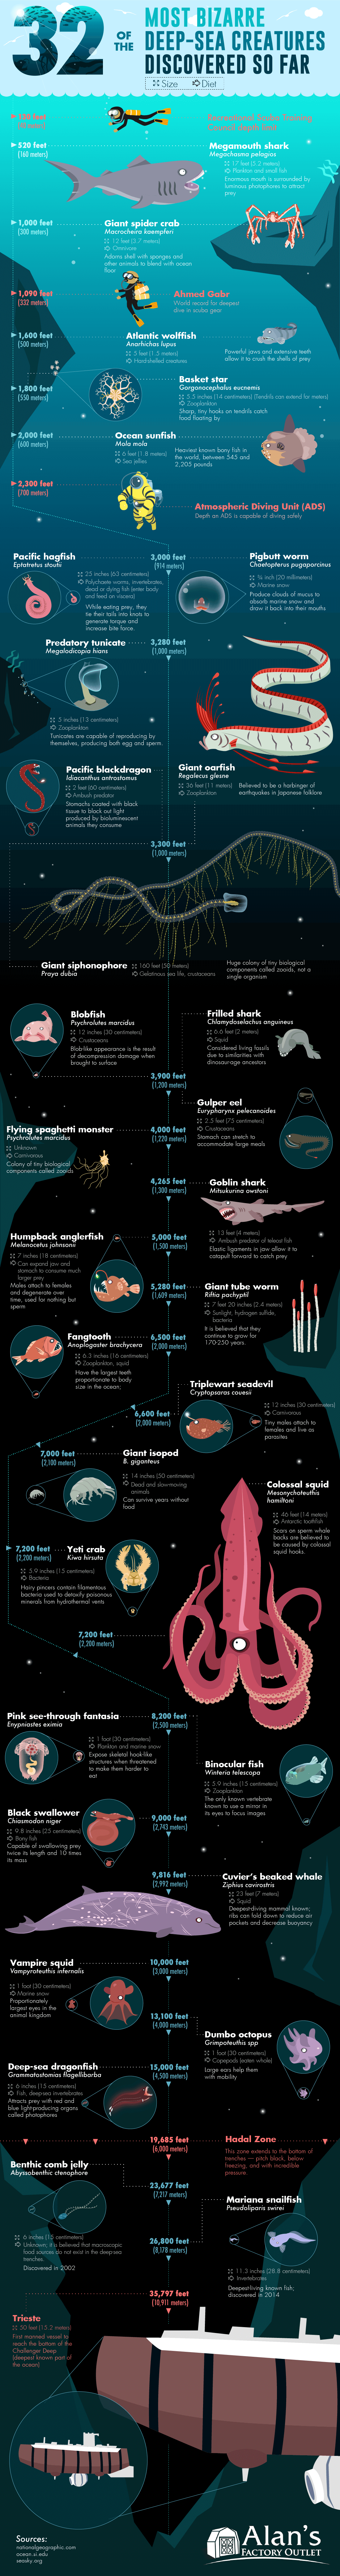 32 of the Most Bizarre Deep-Sea Creatures Discovered So Far